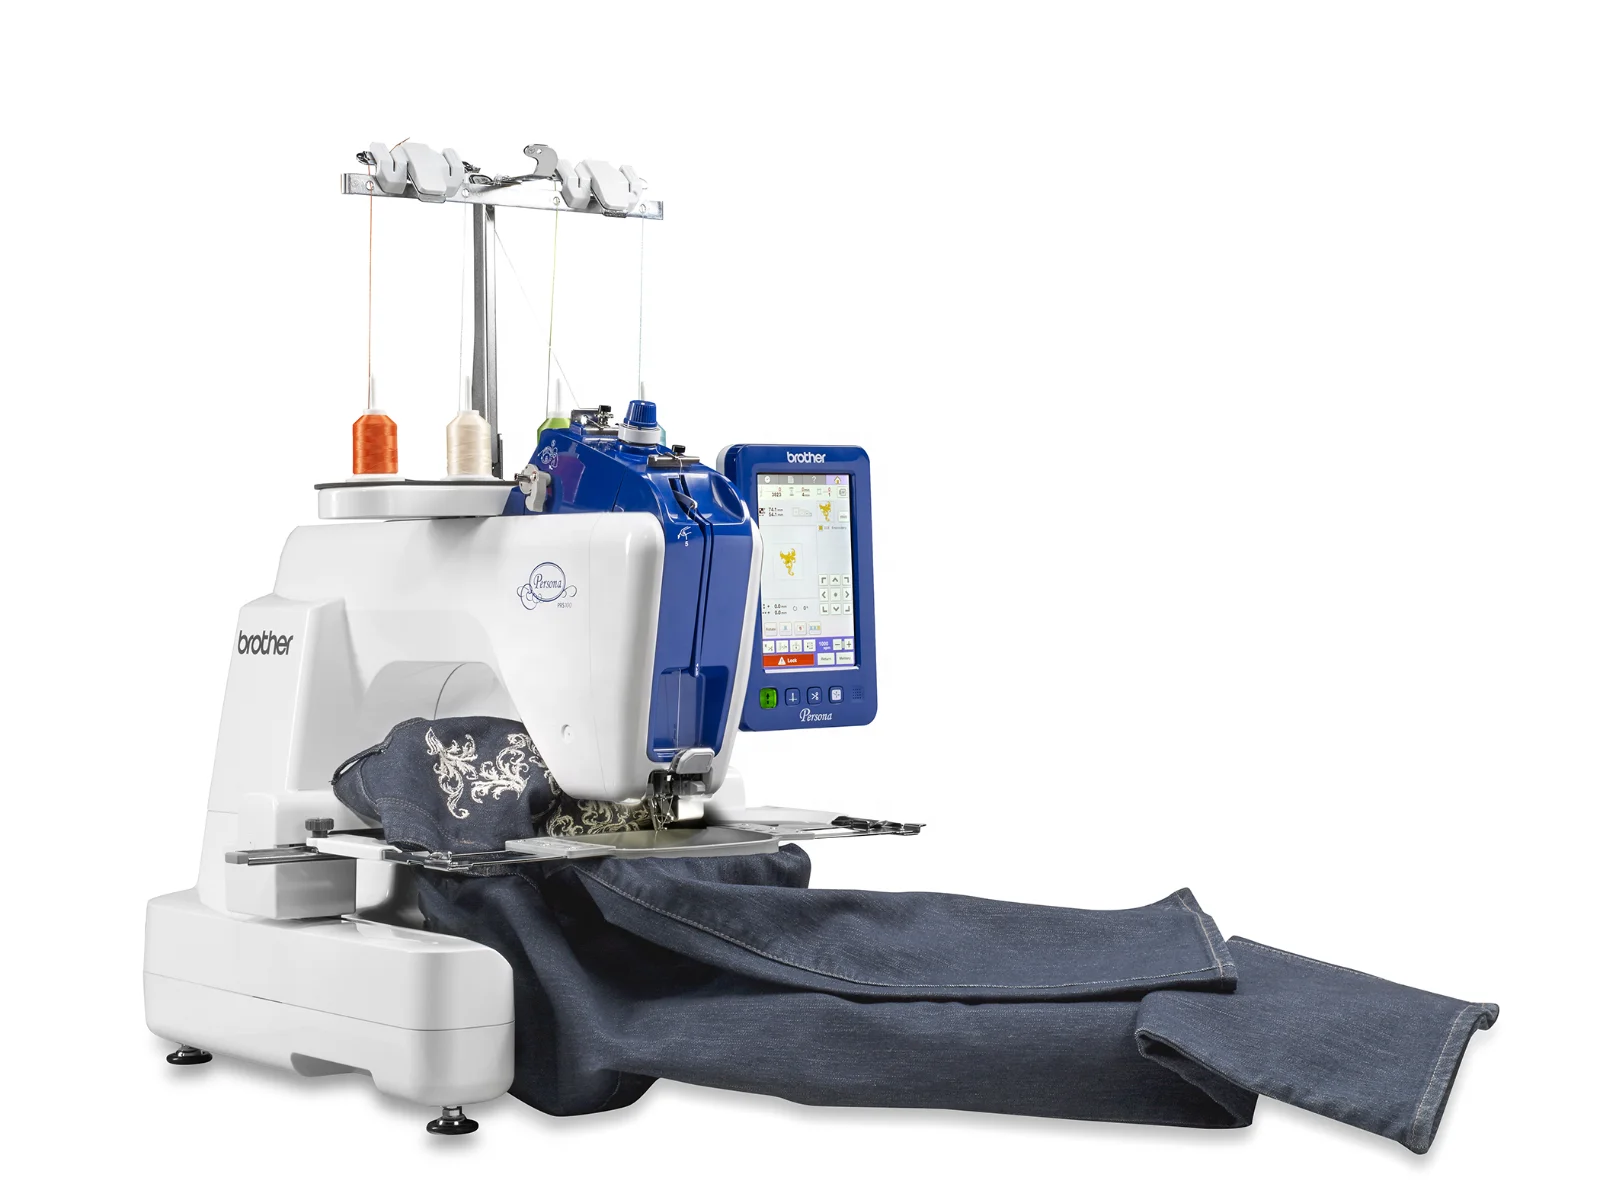 SUMMER SALES DISCOUNT ON Buy With Confidence New Original Activities Brother Persona PRS100 PRS 100 Embroidery Machine